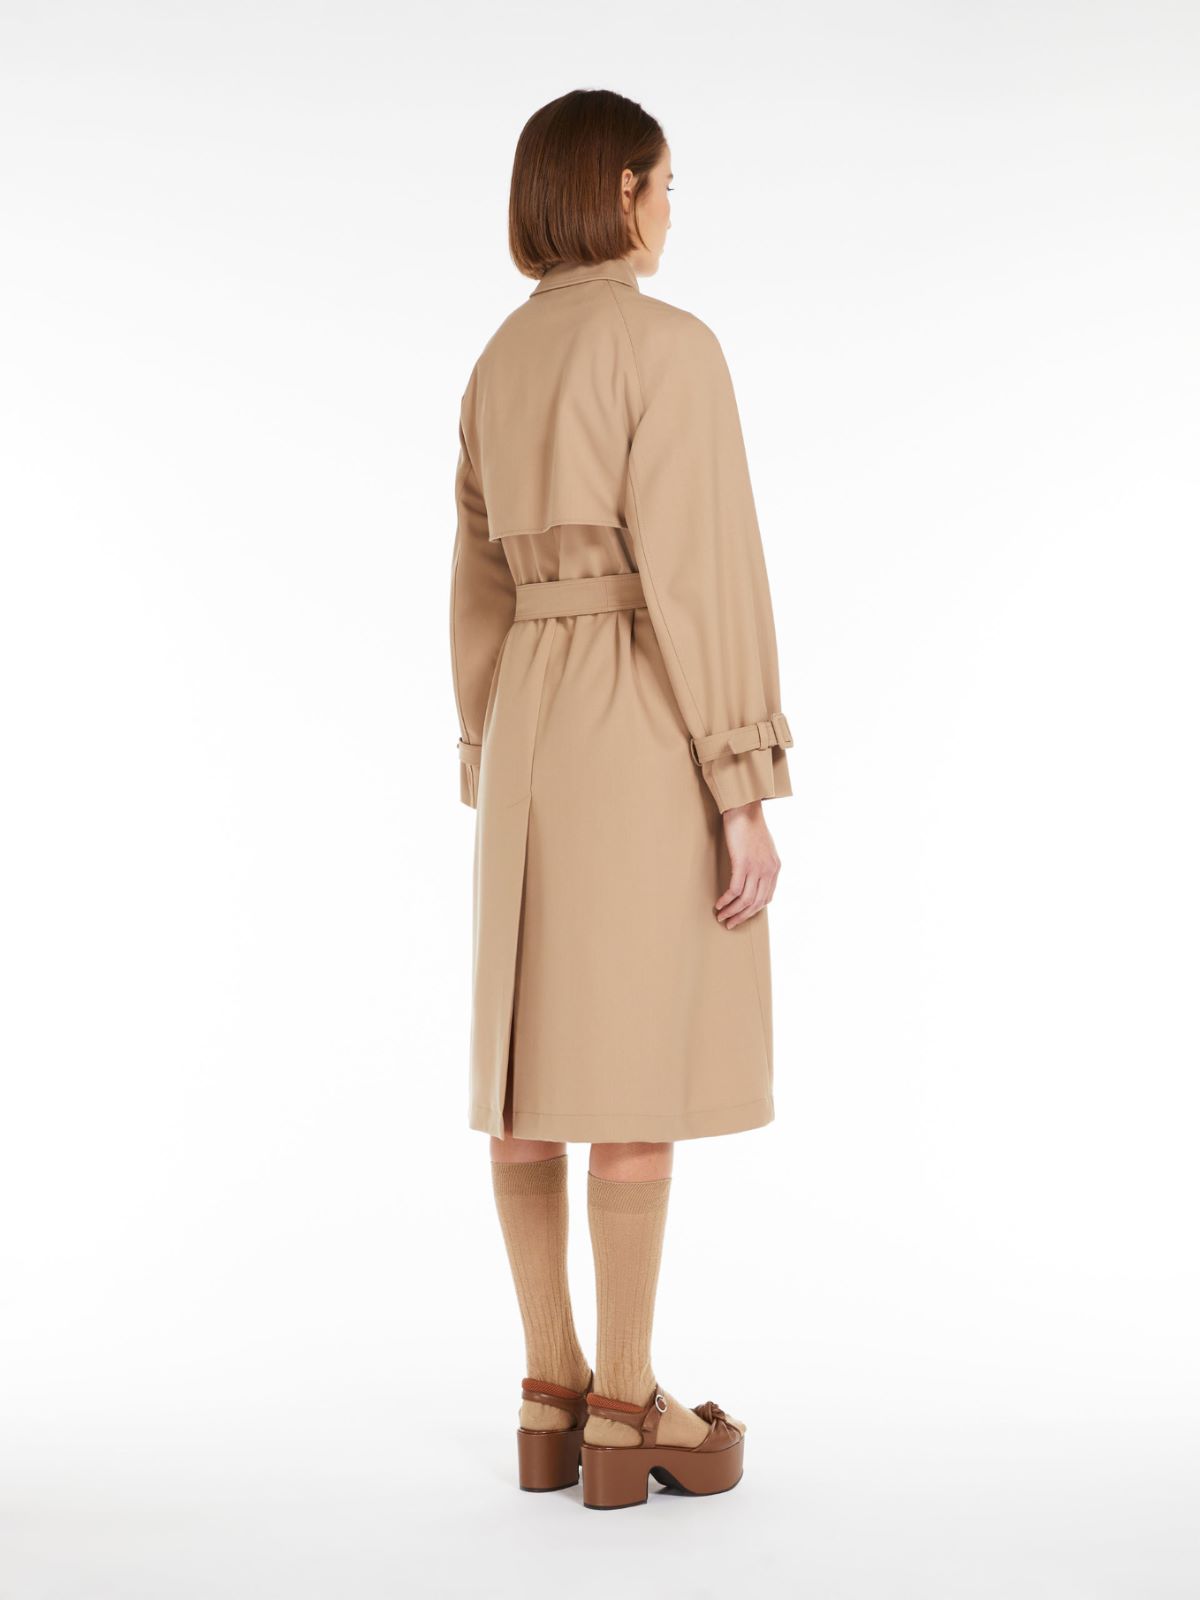 Double-breasted trench coat in showerproof fabric - CAMEL - Weekend Max Mara - 3